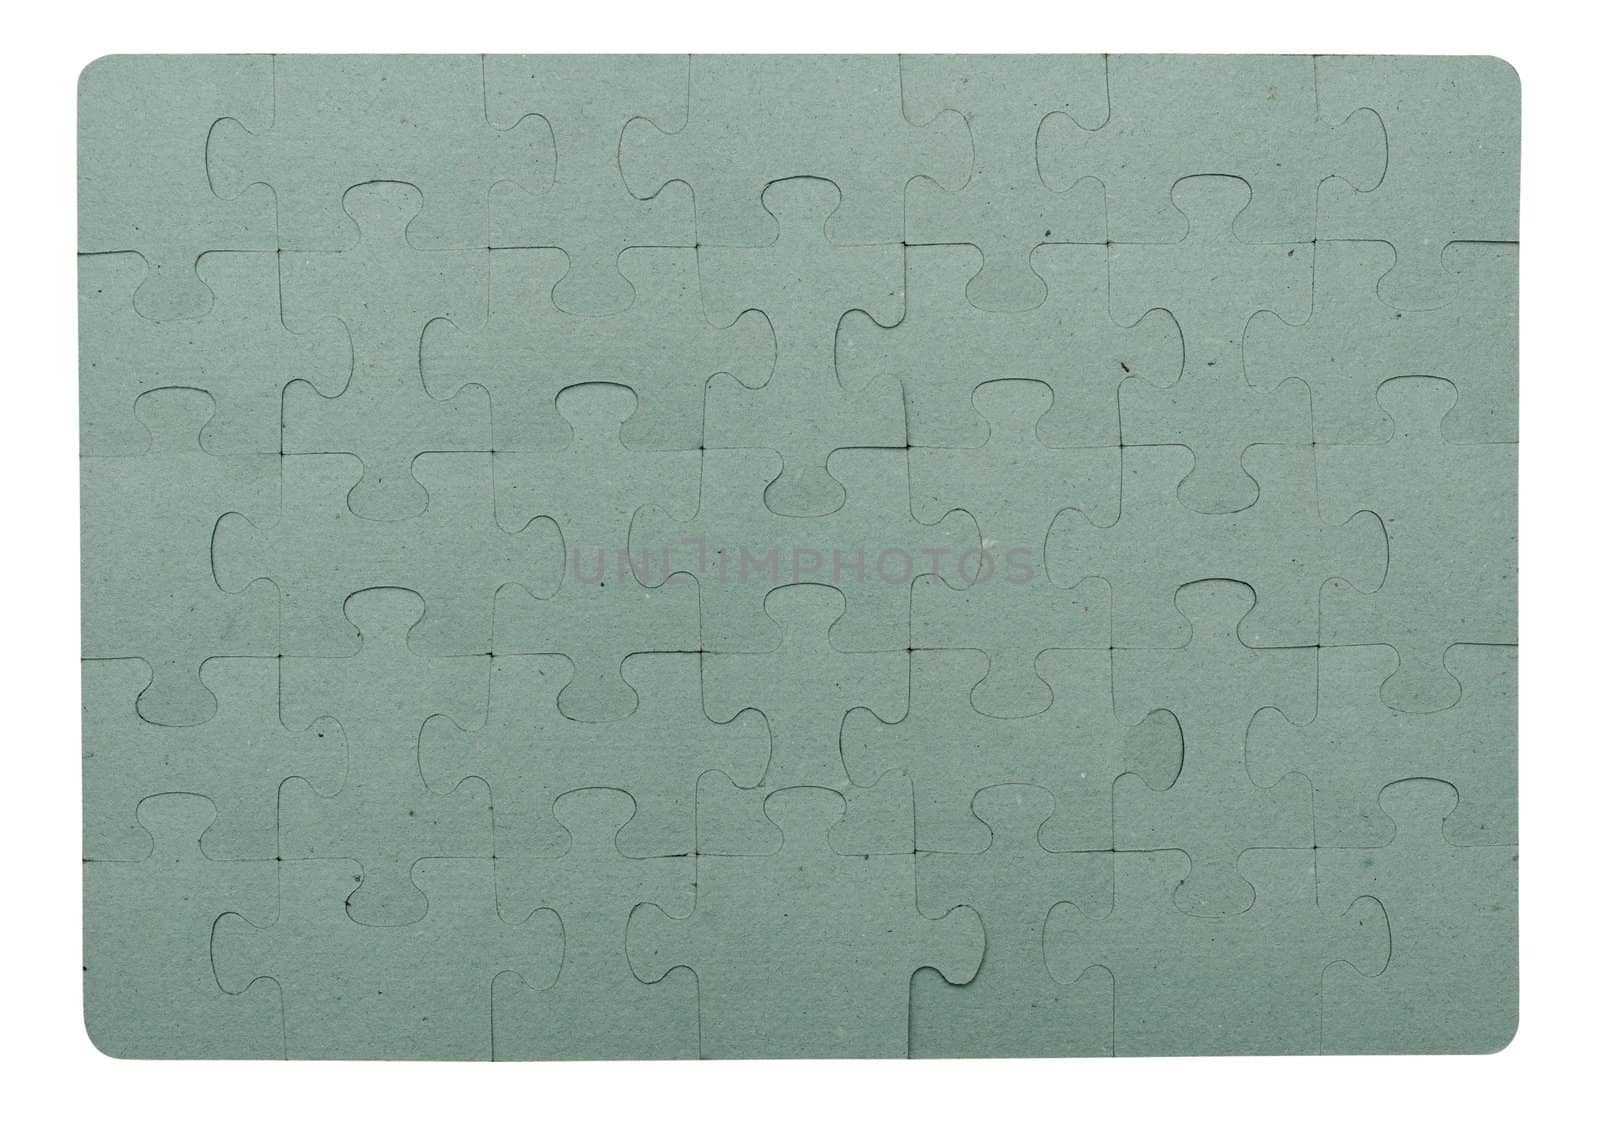 blank grey jigsaw puzzle pieces all connected